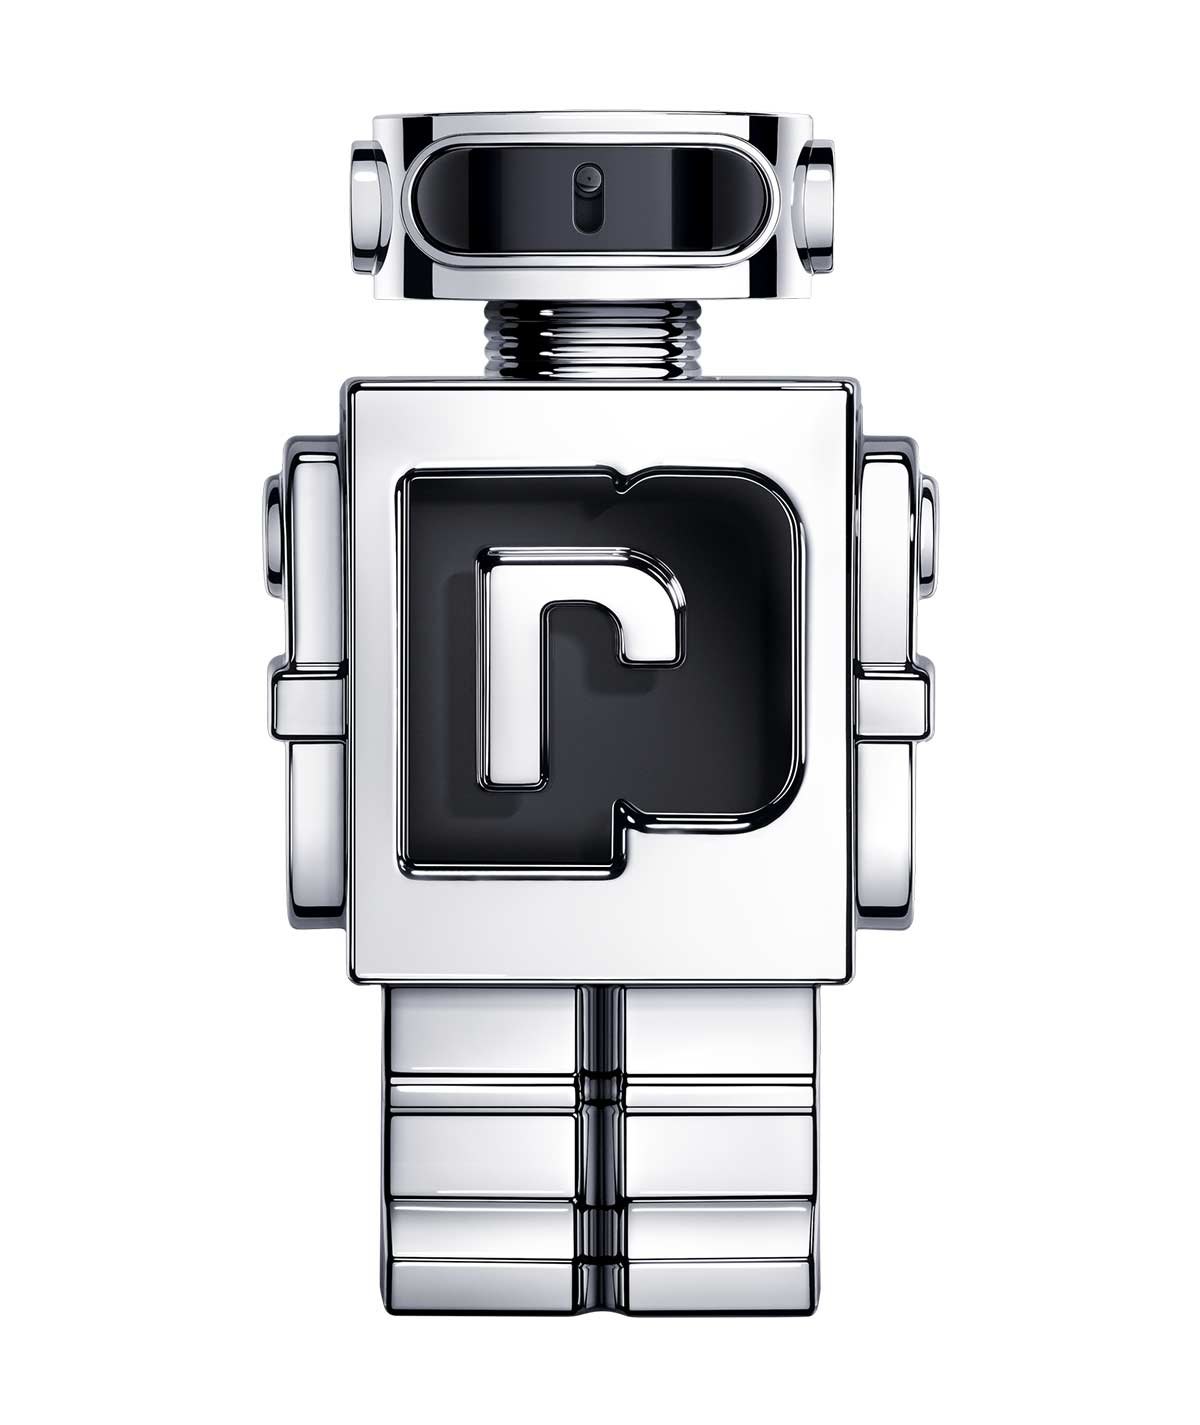 Best Paco Rabanne Cologne - FragranceReview.com